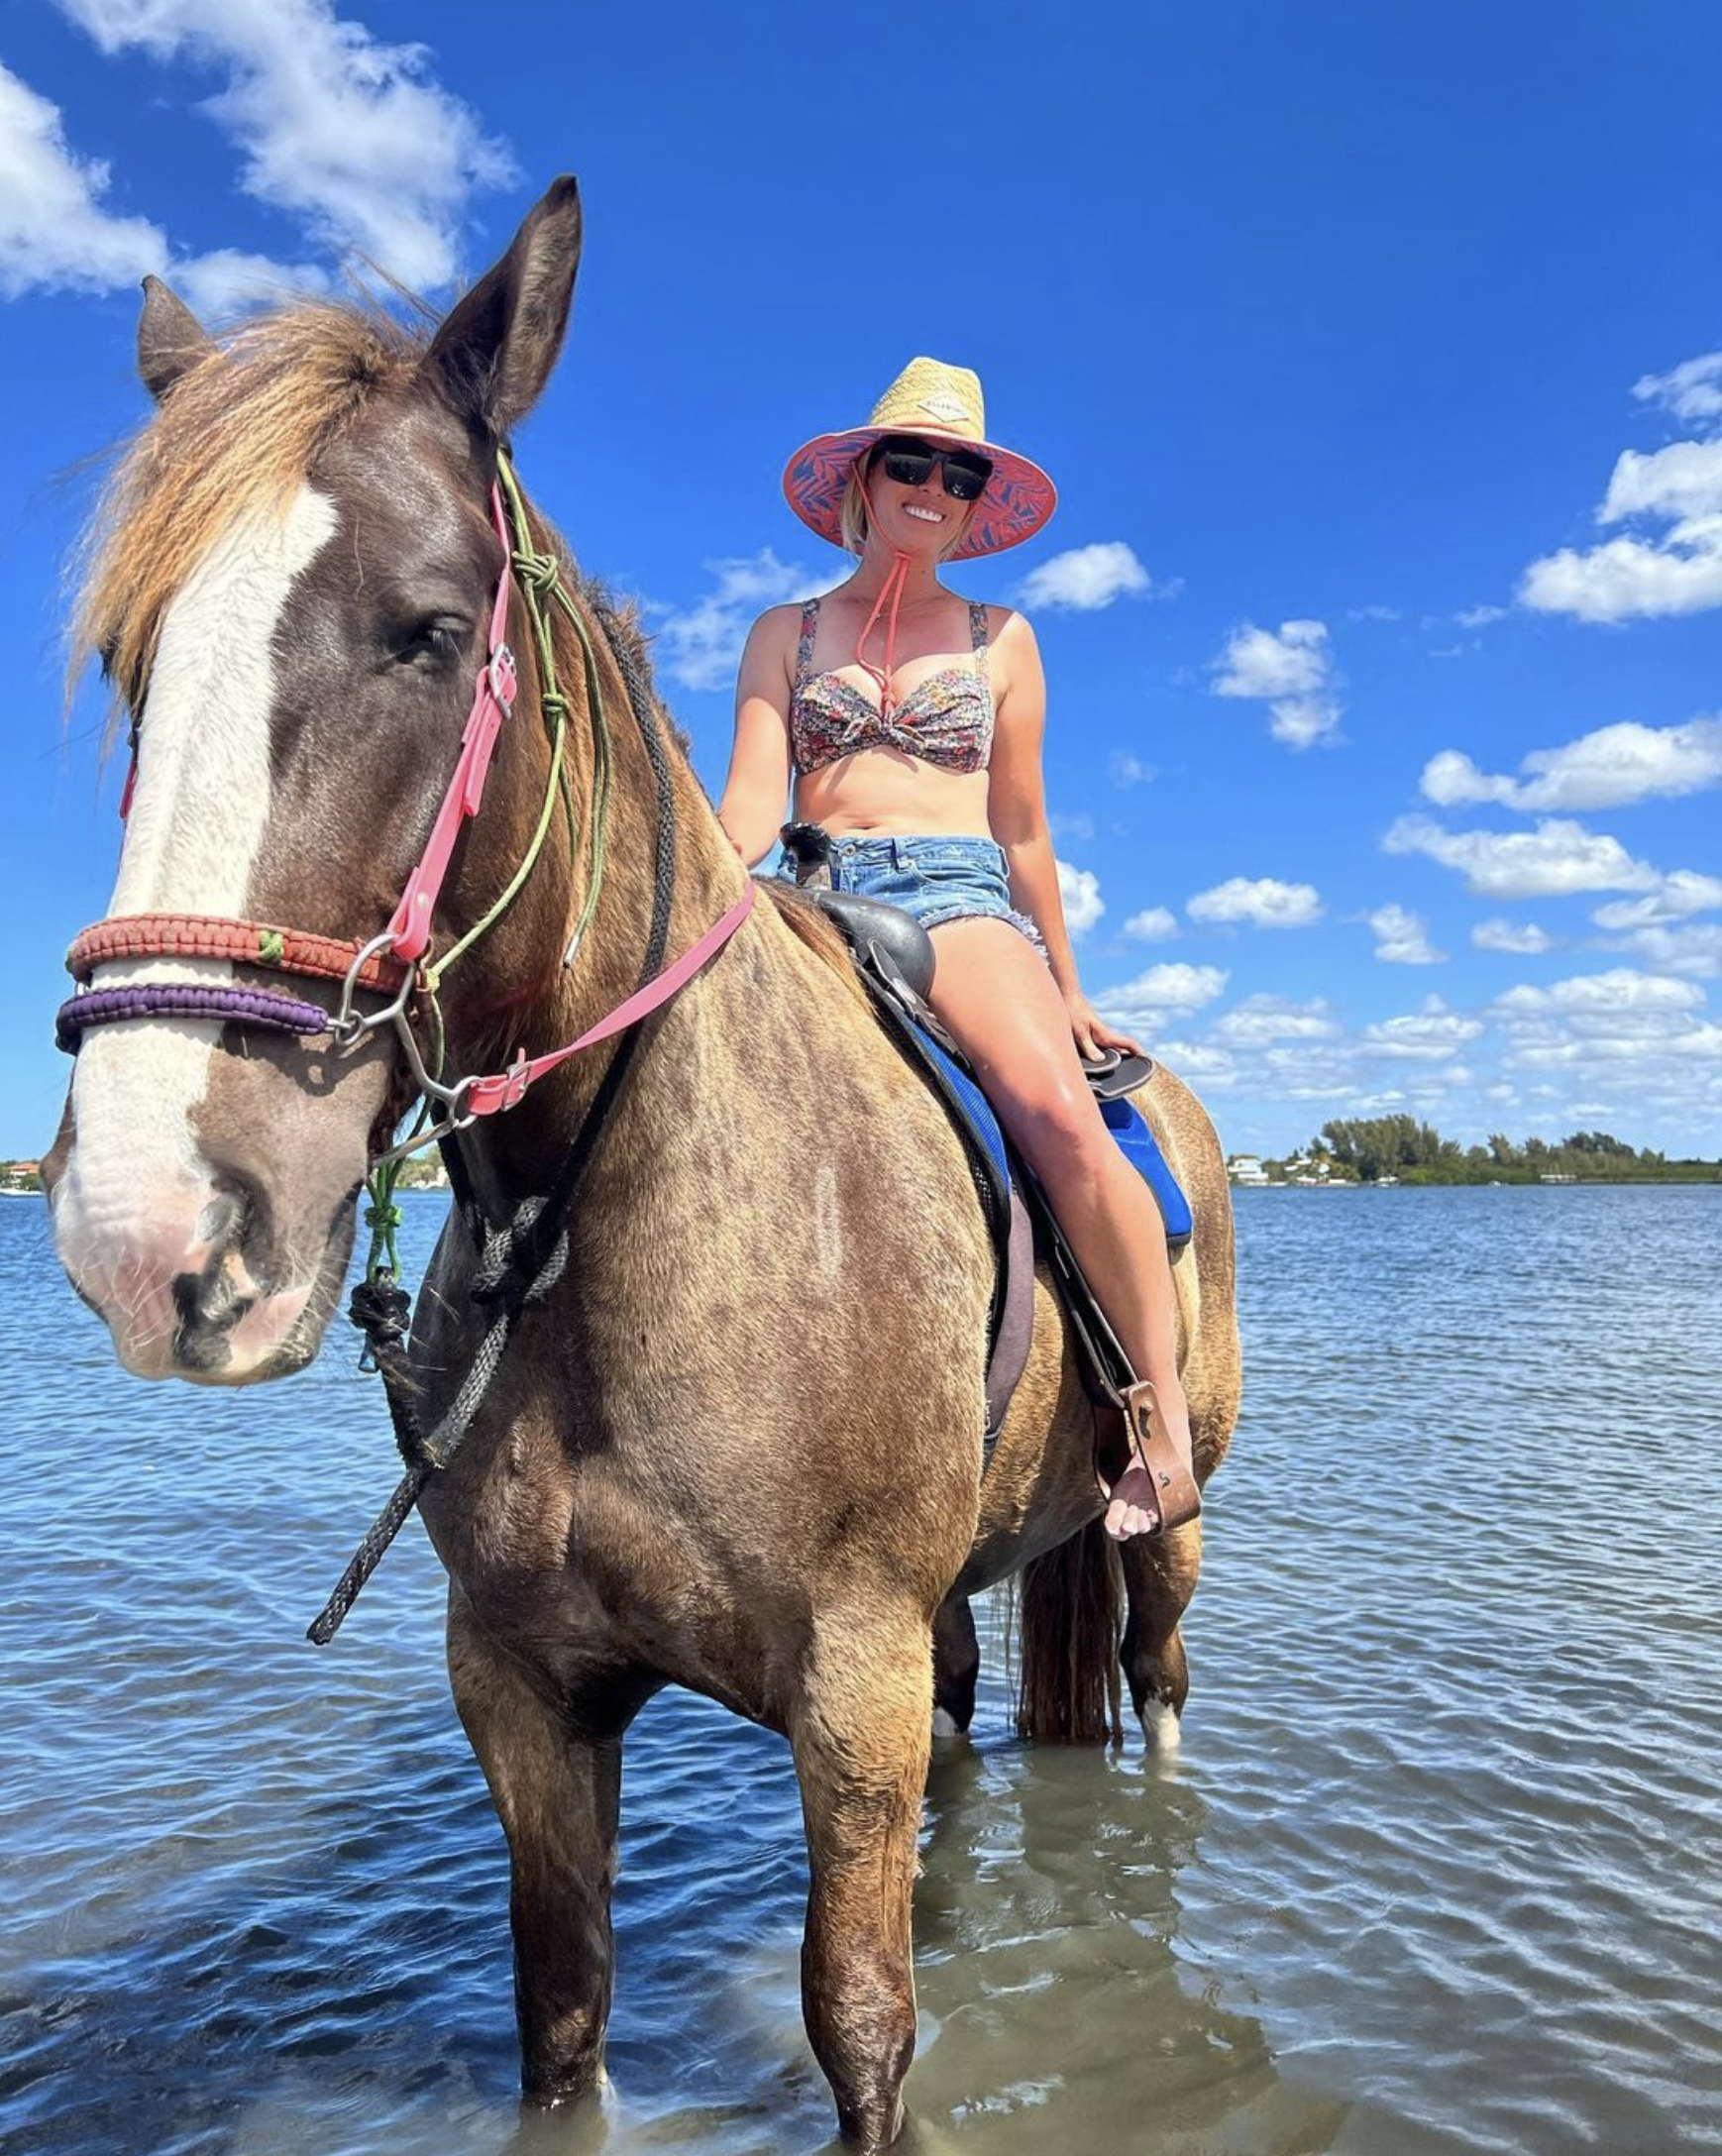 Monique richter in hat and swimsuit sitting on horse standing in water